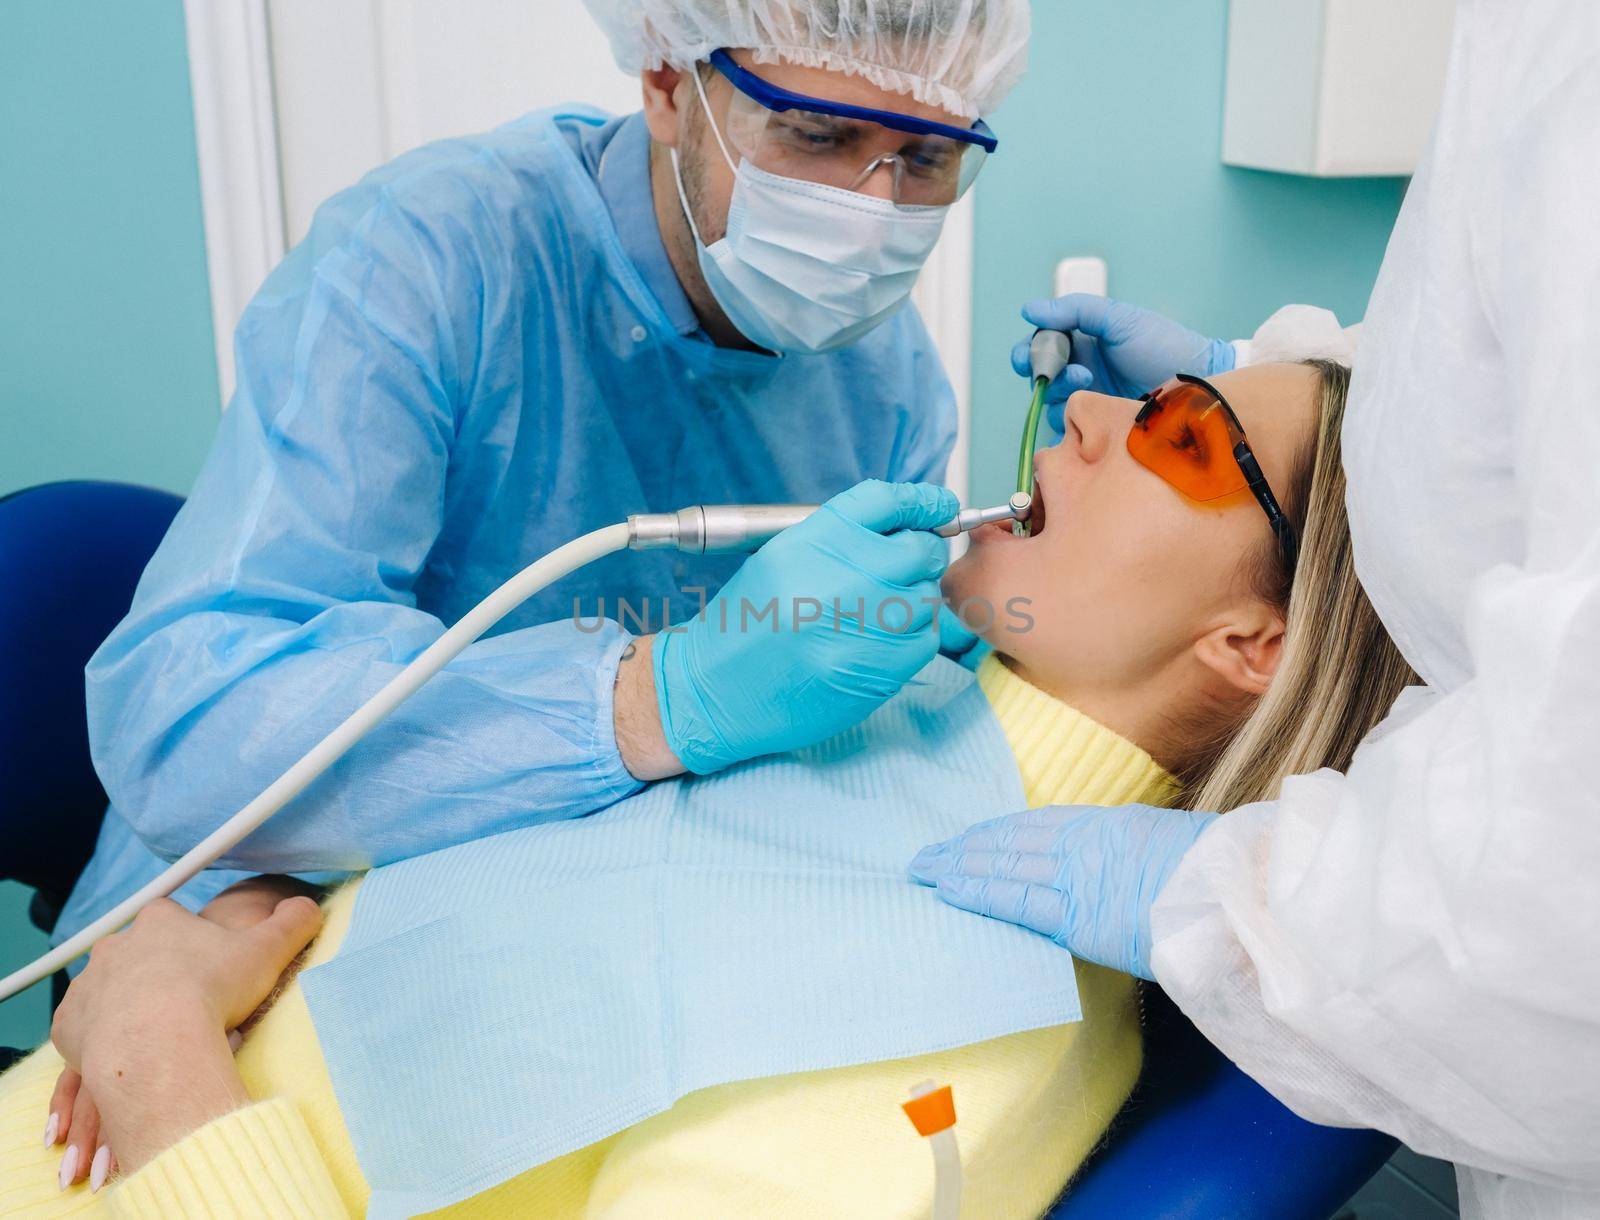 A male dentist with dental tools drills the teeth of a patient with an assistant. The concept of medicine, dentistry and healthcare by Lobachad